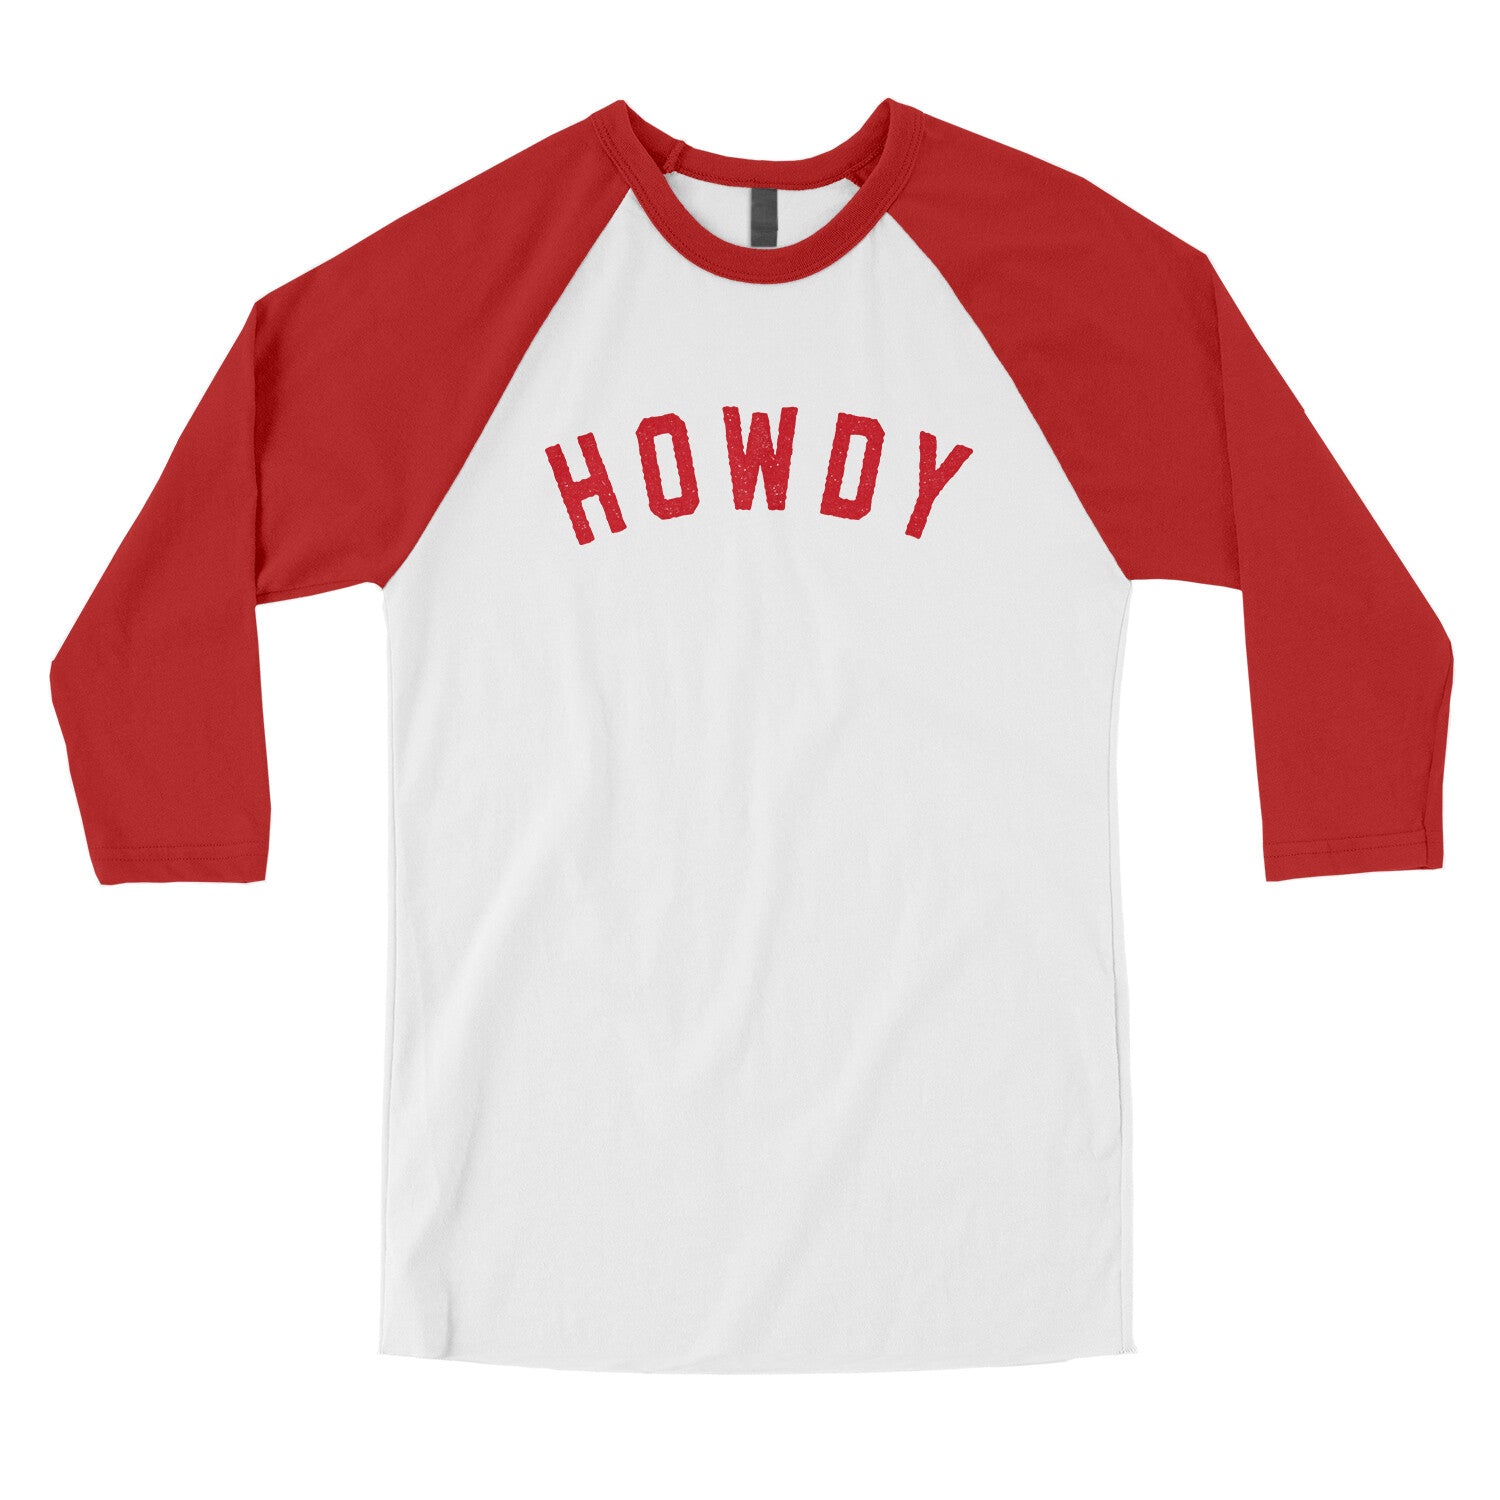 Howdy in White with Red Color